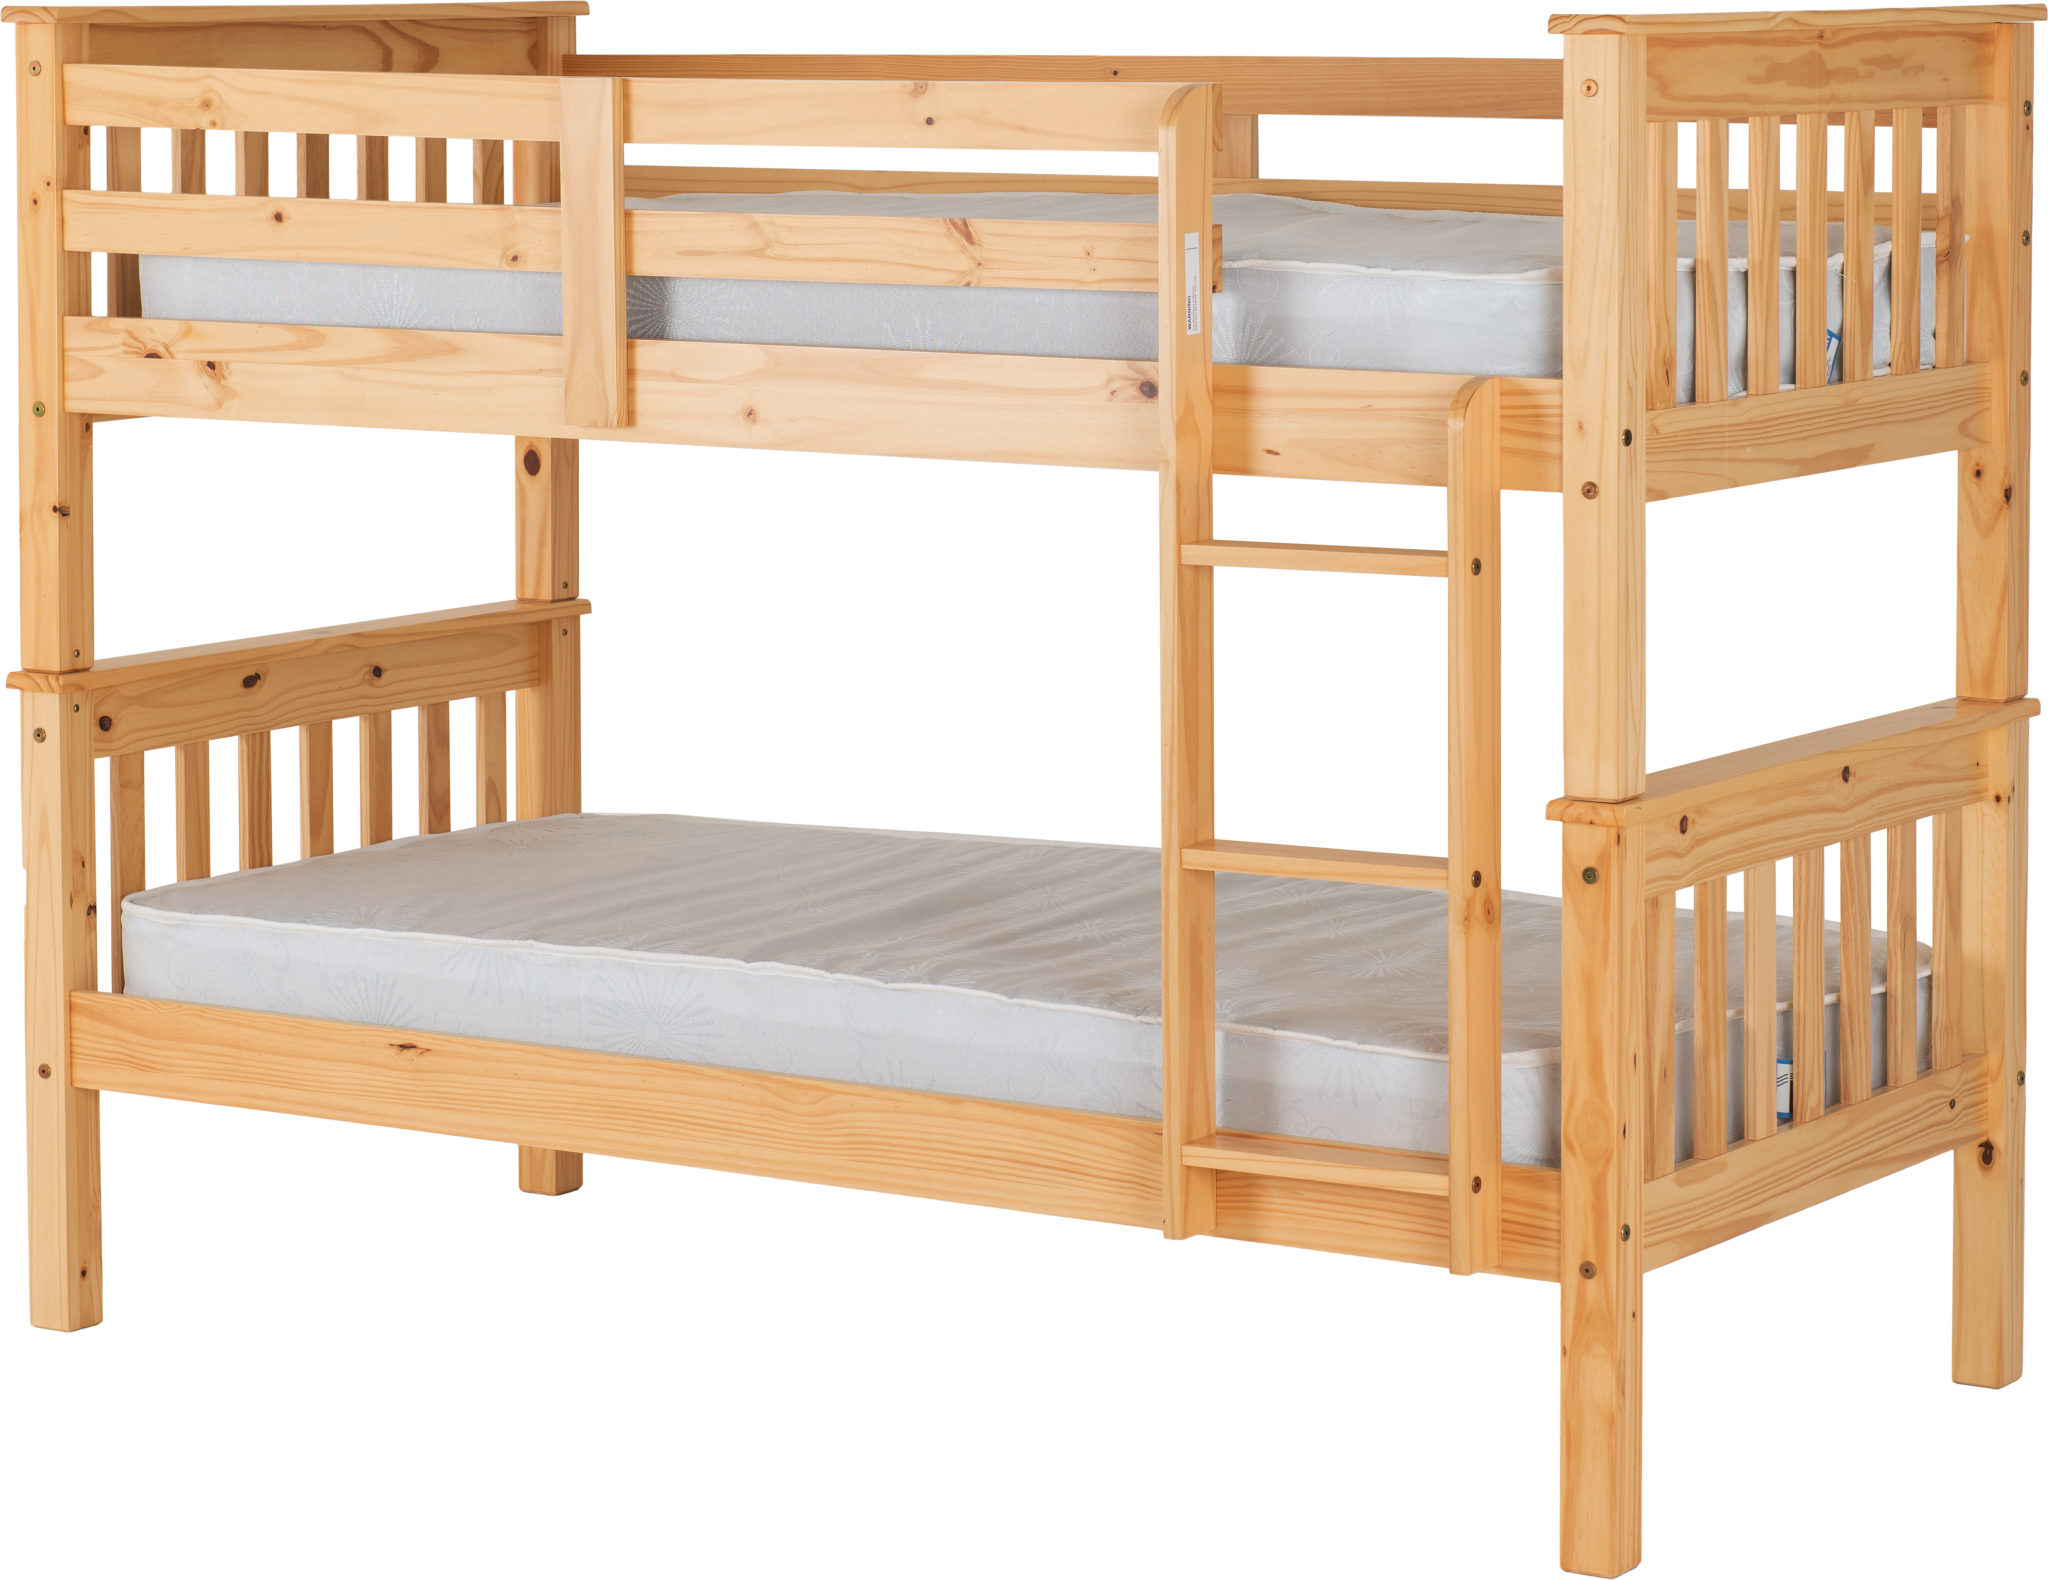 Neptune Solid Pine Bunk Bed Frame, Pine Bunk Beds